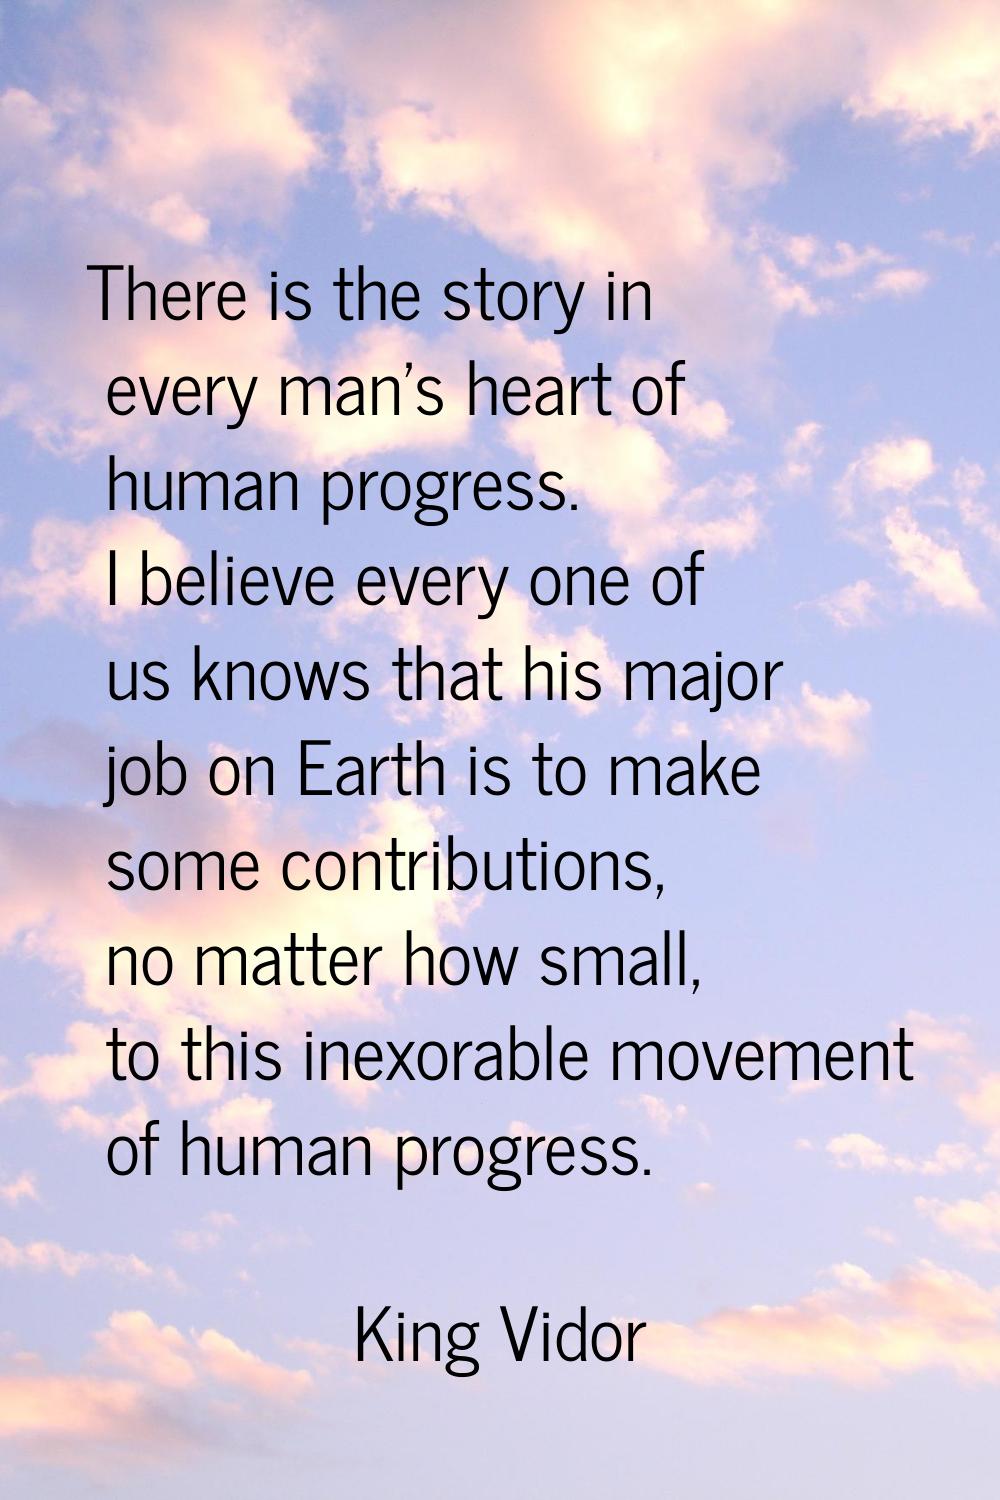 There is the story in every man's heart of human progress. I believe every one of us knows that his